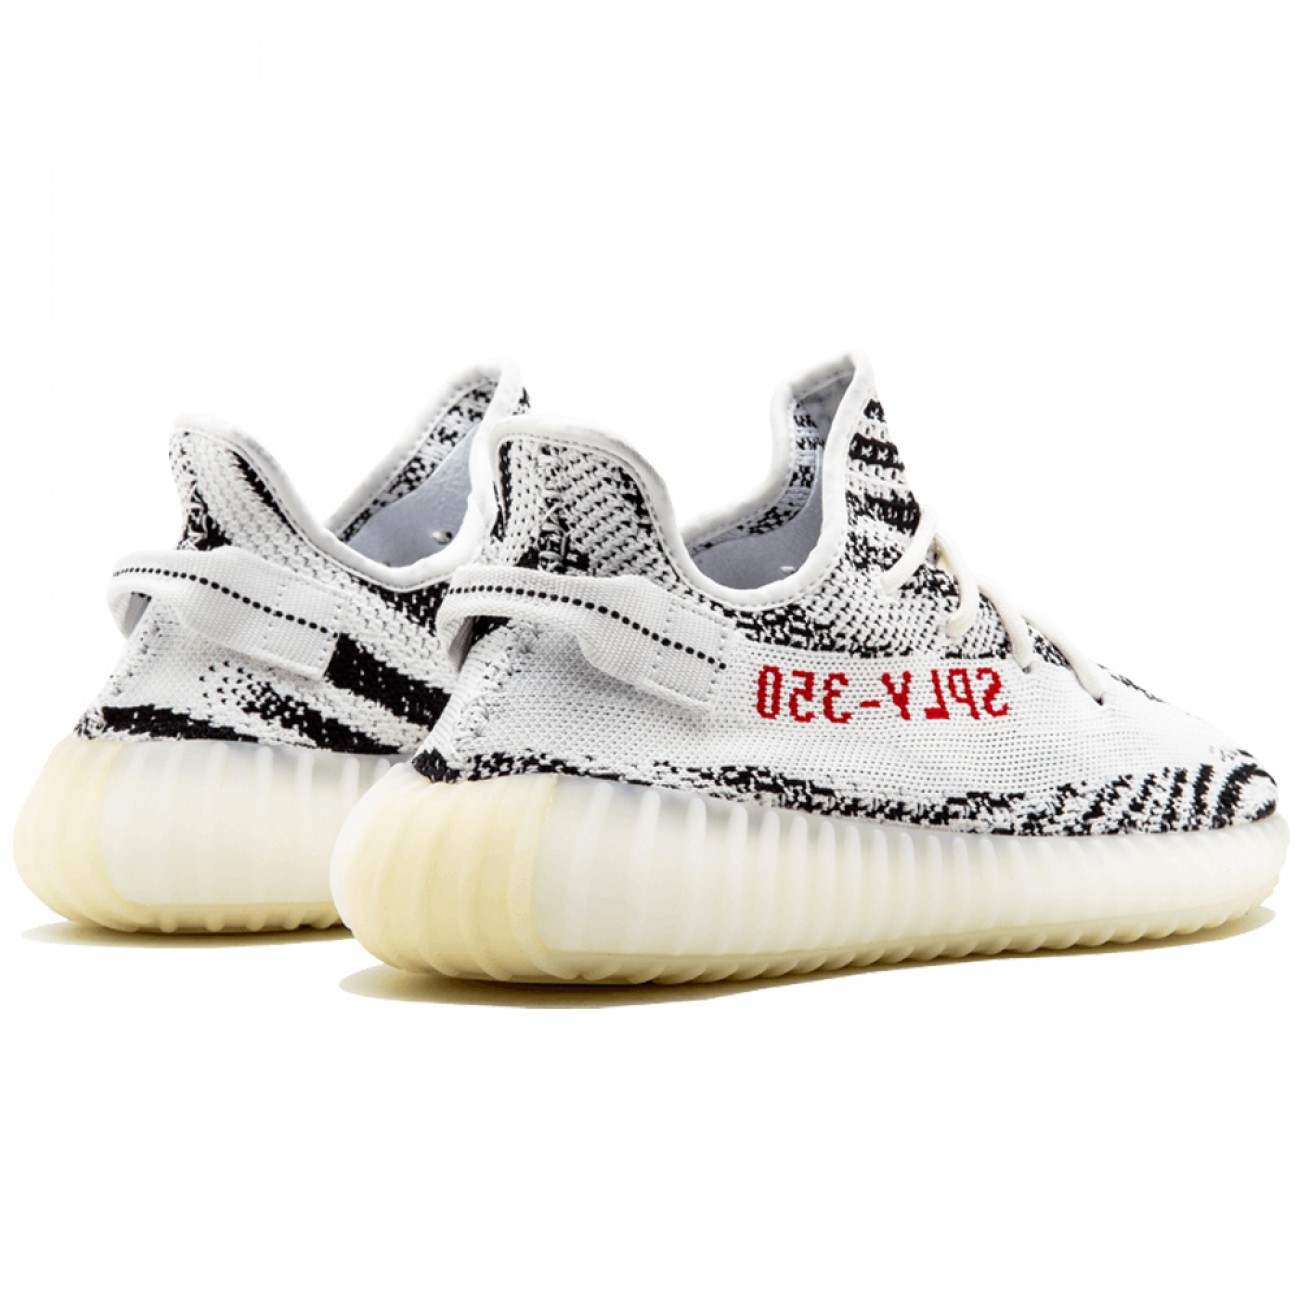 Adidas Yeezy Boost 350 V2 Zebra Cp9654 Outfit 2018 Release Date (4) - newkick.org